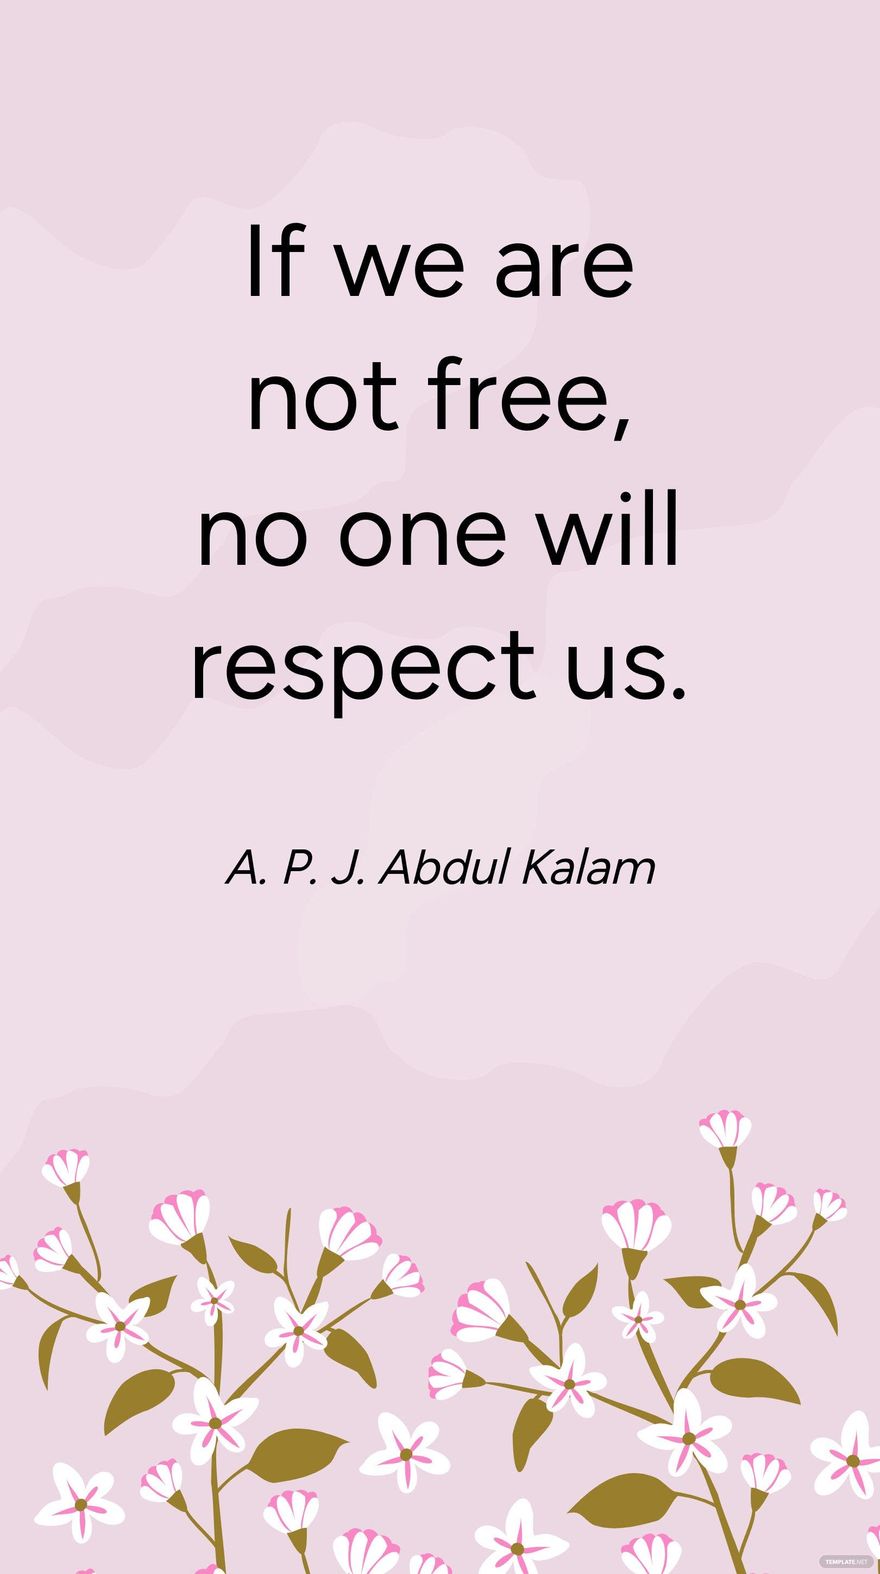 Free A. P. J. Abdul Kalam - If we are not free, no one will respect us. in JPG